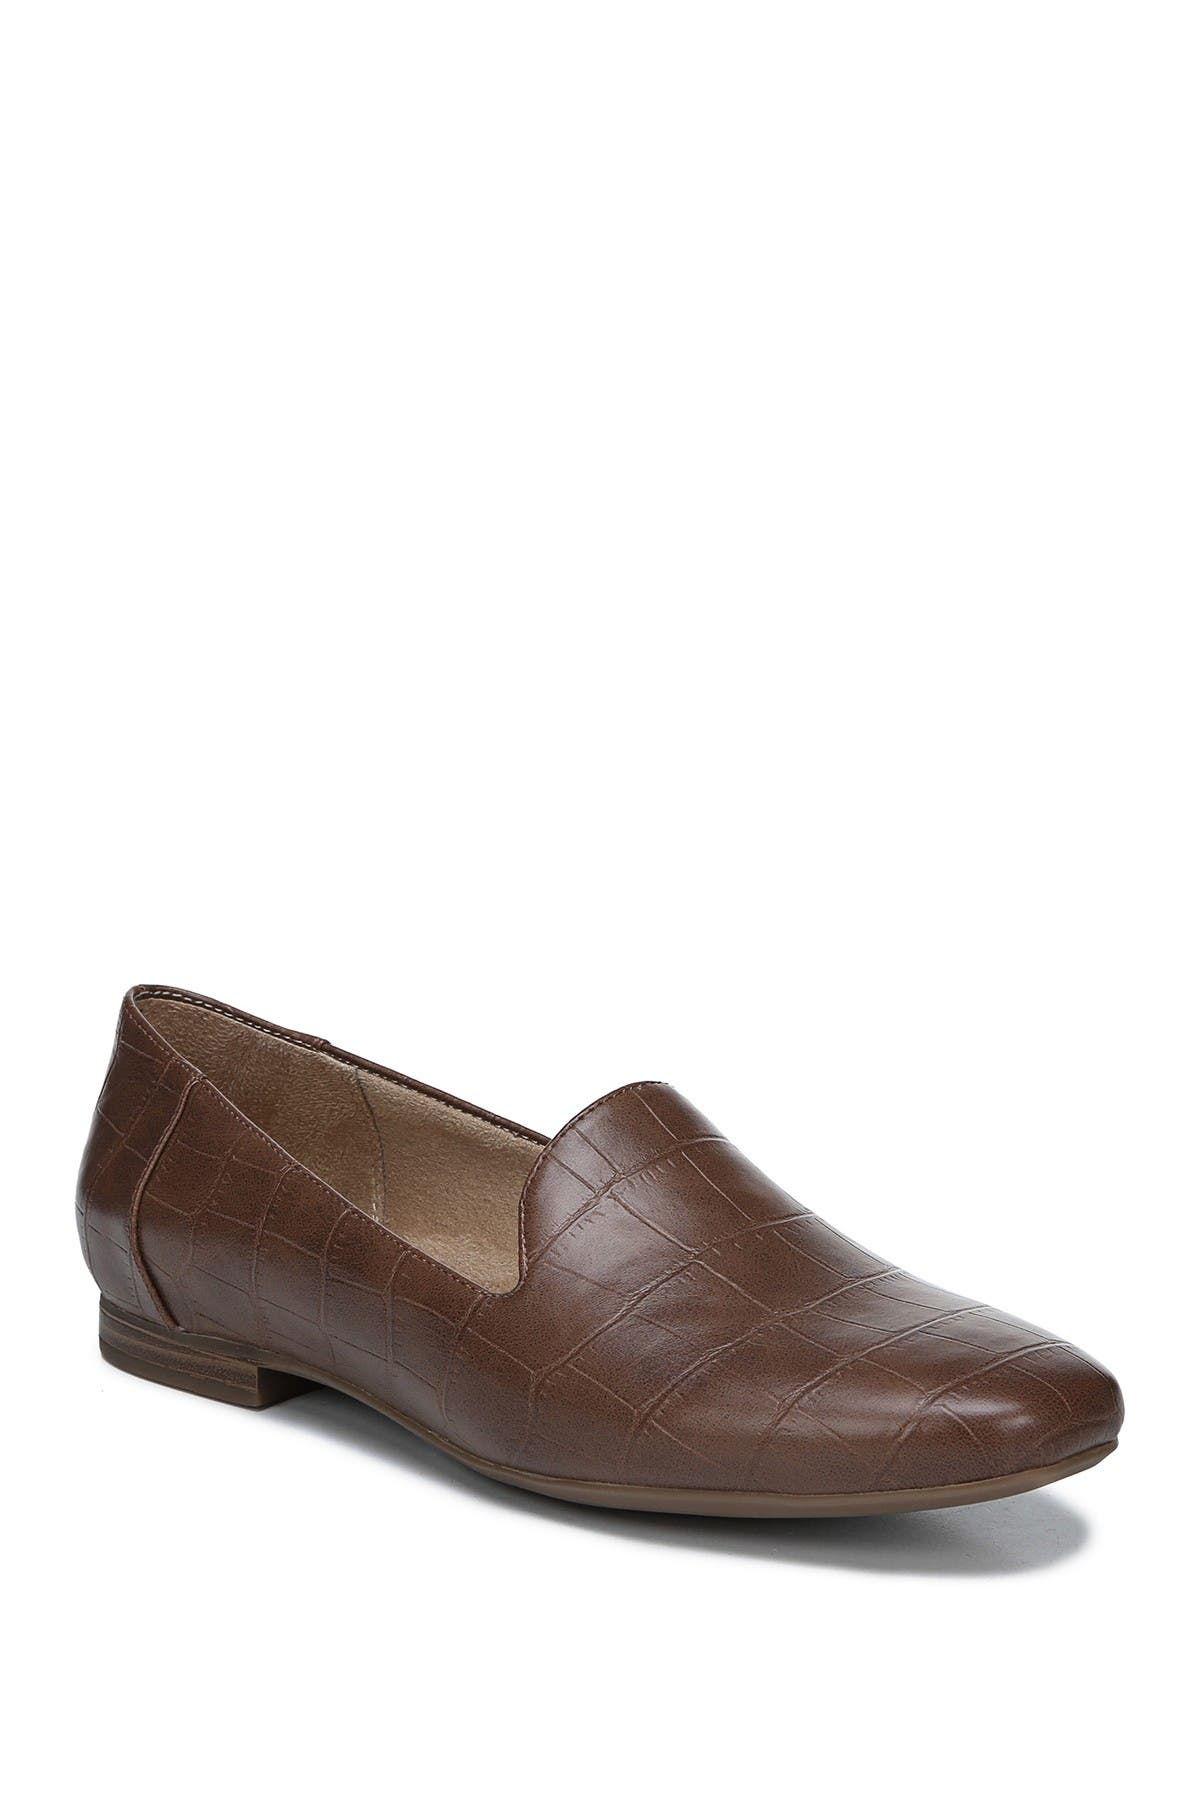 naturalizer shoes wide width